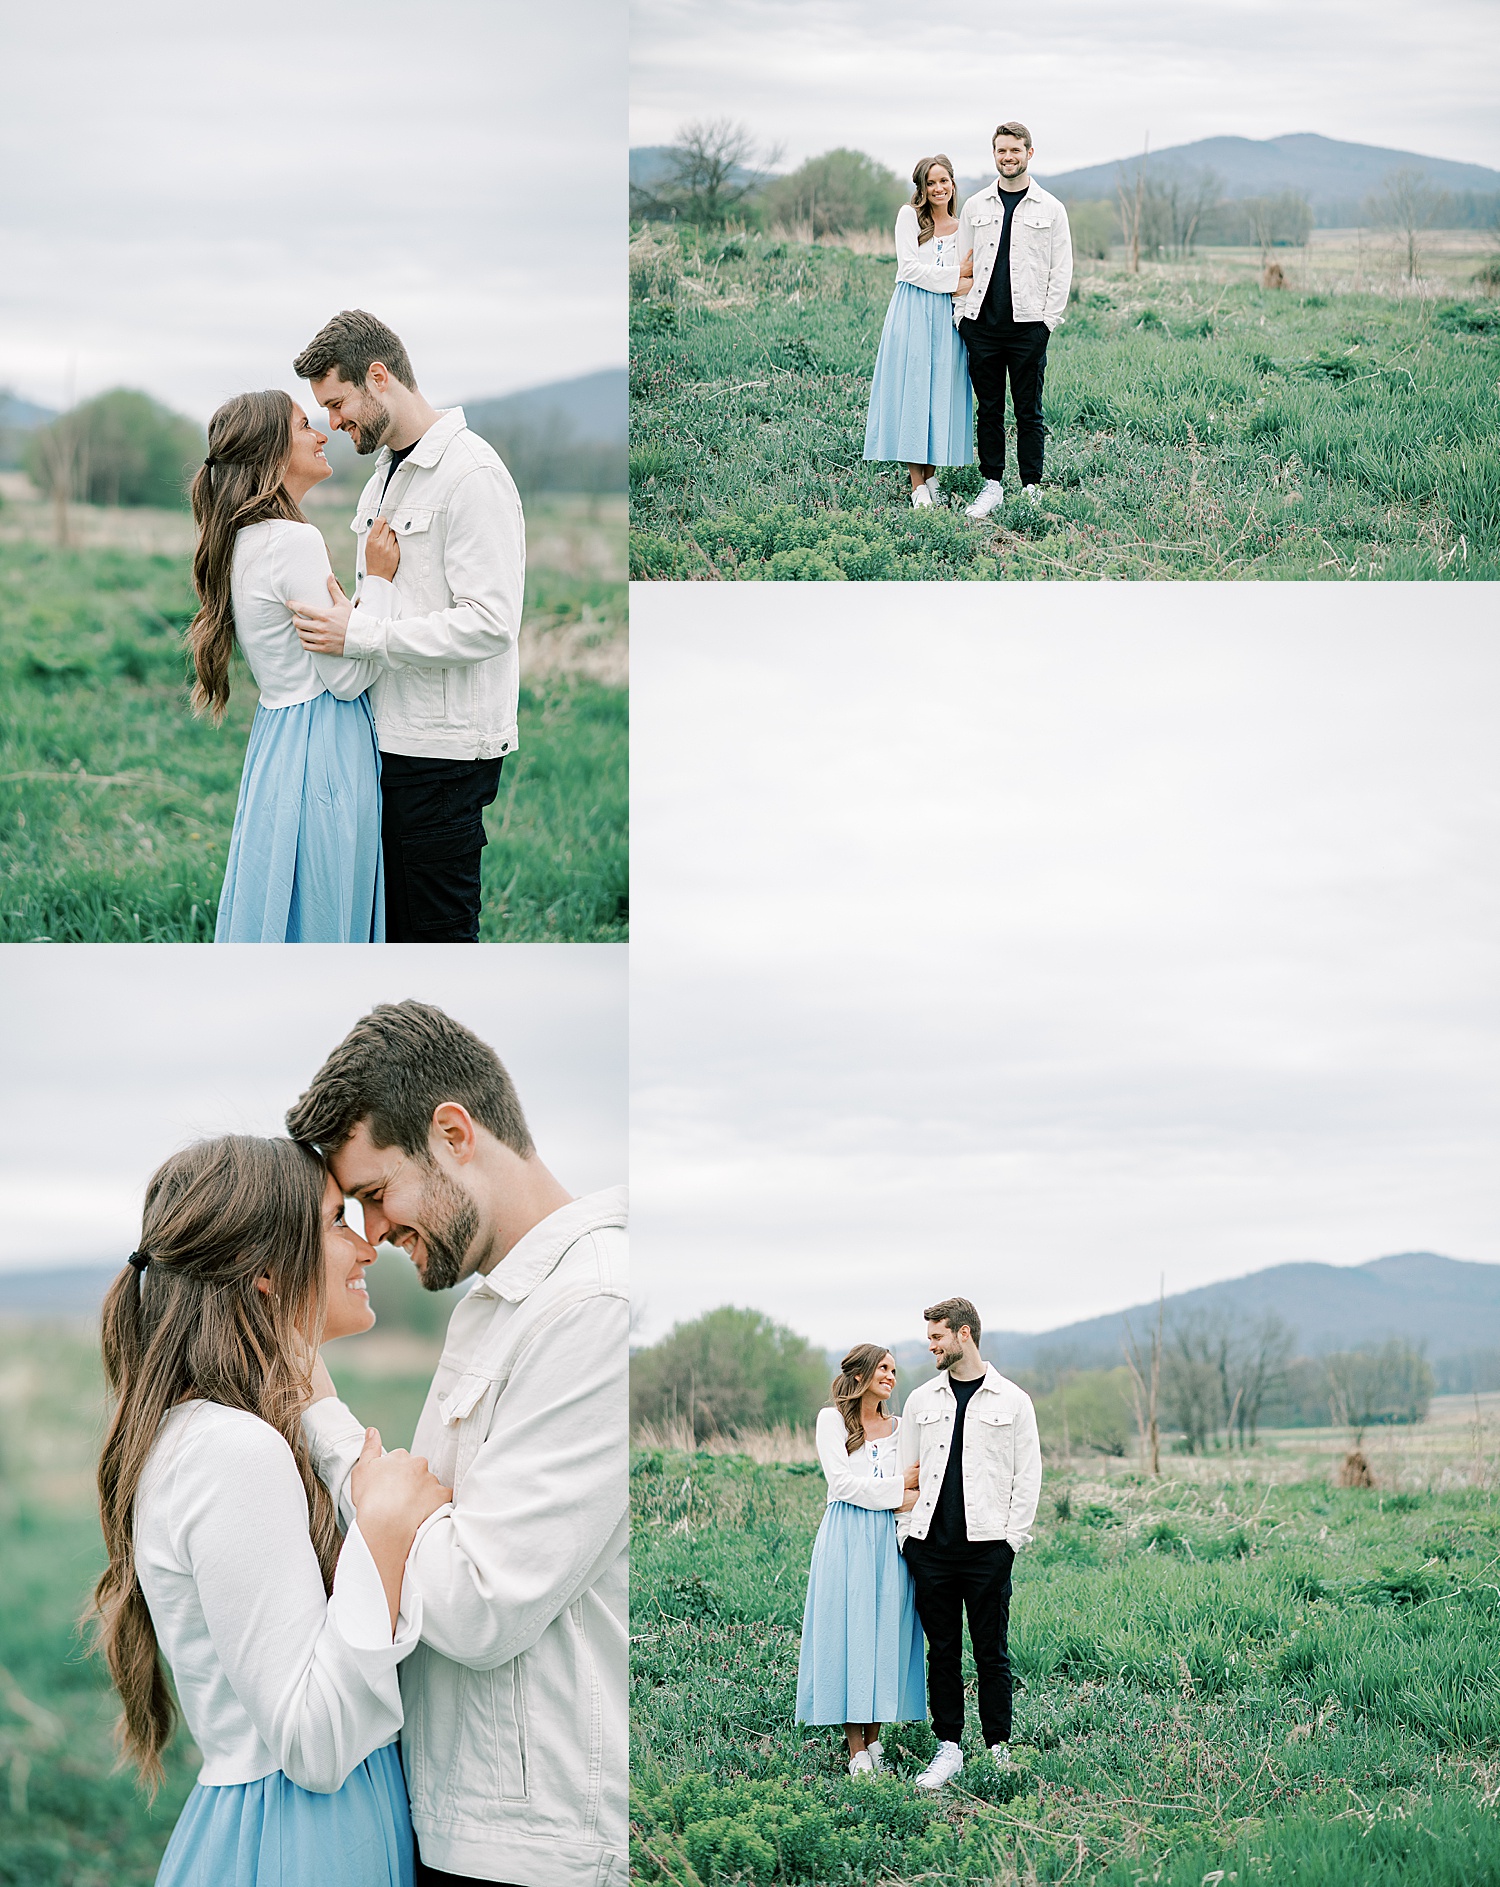 Lauxmont Farms Engagement Session with mountains in the background and wearing white jackets on a cloudy day 